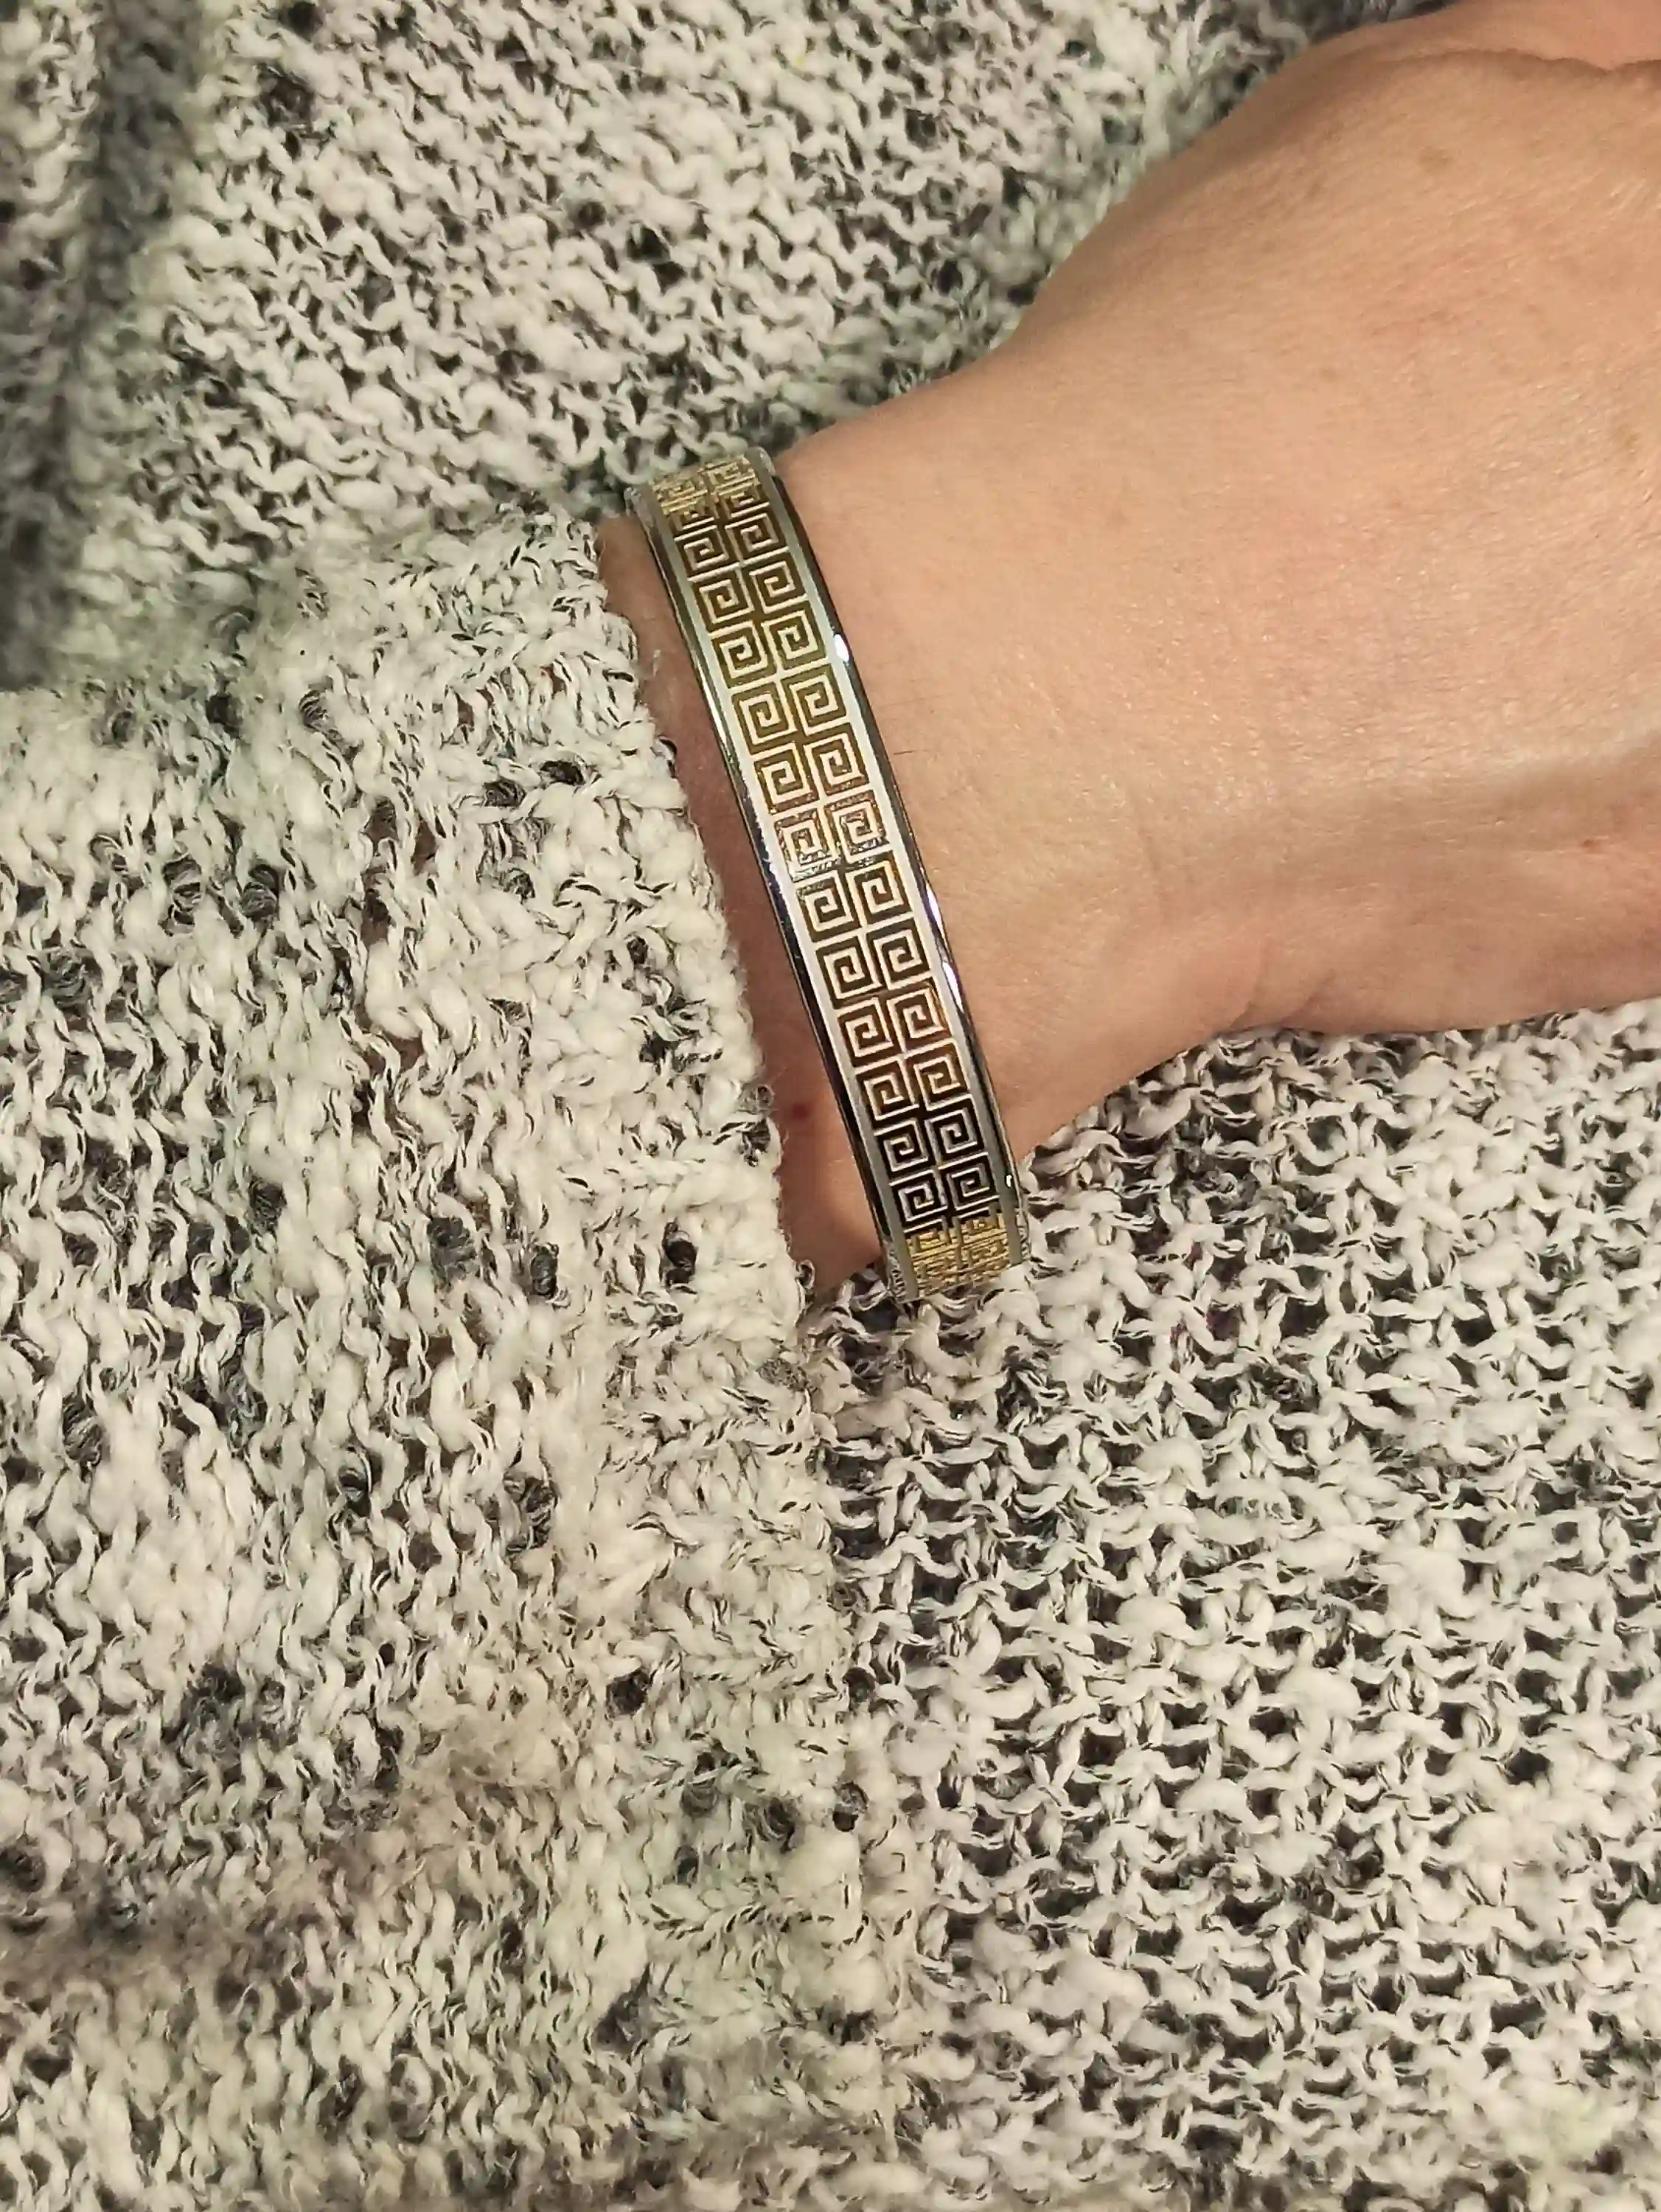 GREEK Bangle for women 24kt GOLD Meander Bracelet /Ancient Greek Jewelry Gift for Bride ETERNITY Jewelry for Women Bridesmaids Moms Sister 